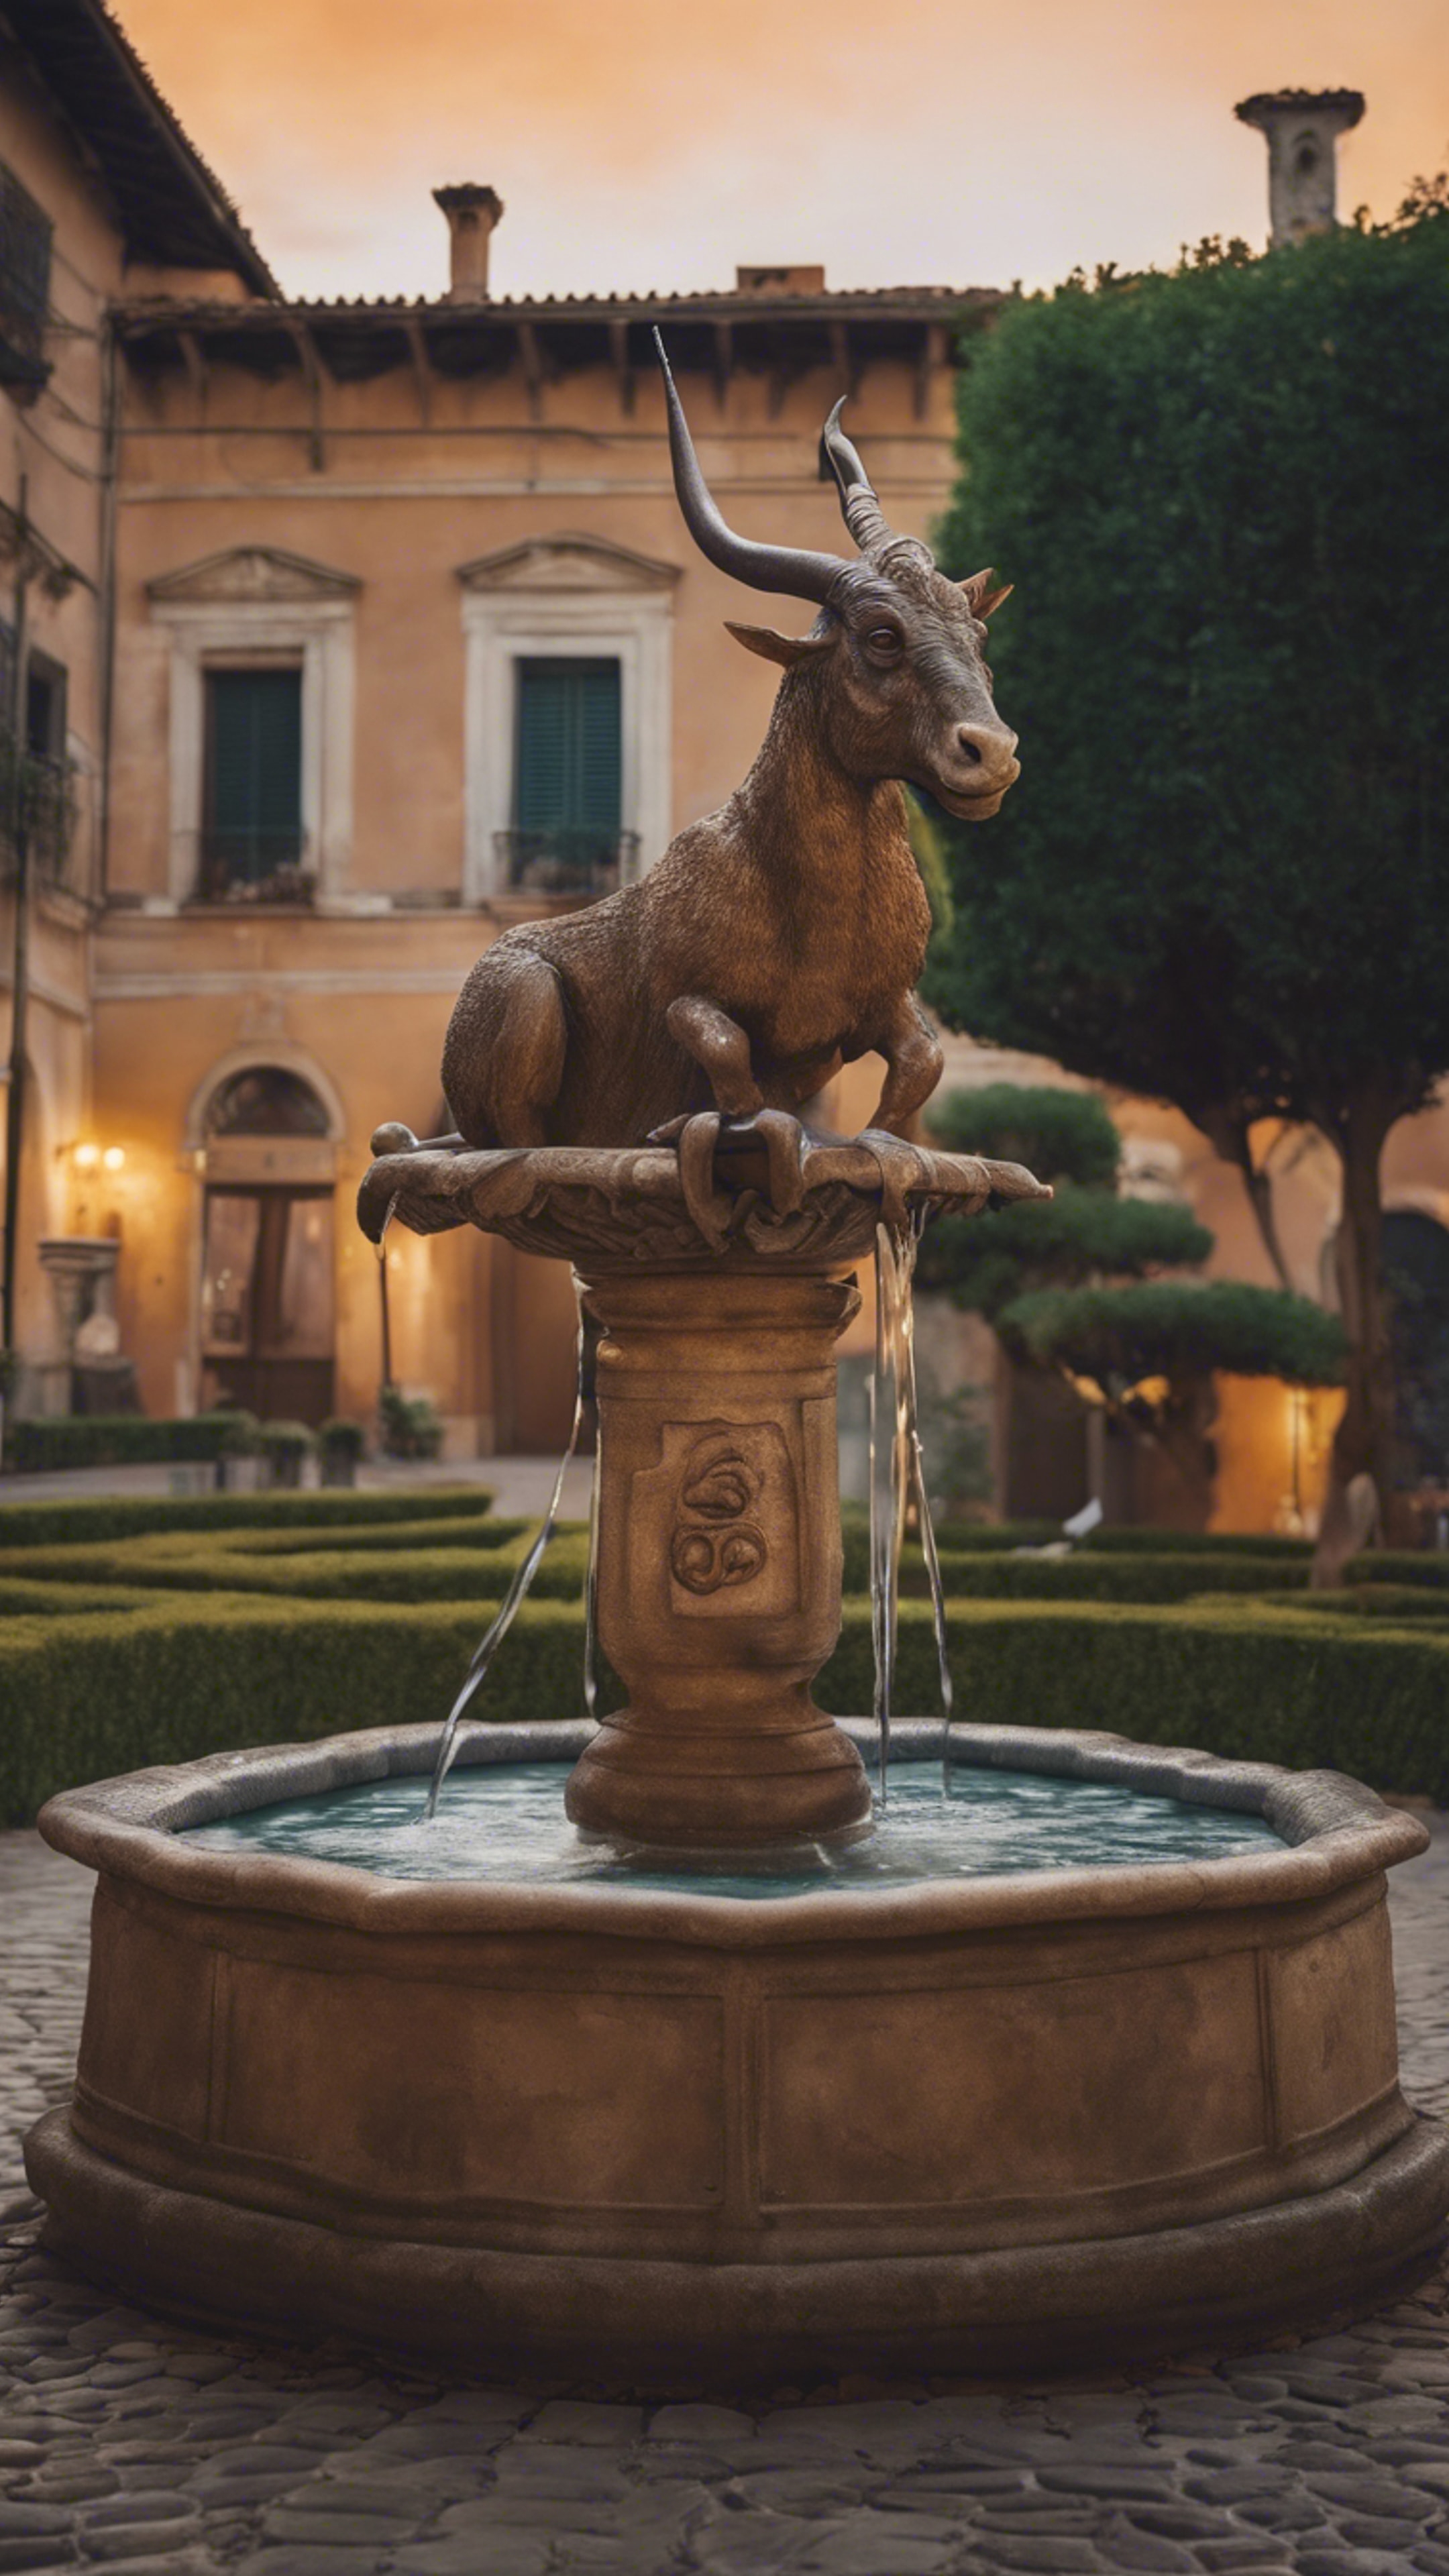 A Capricorn-themed water fountain in the middle of an Italian-style courtyard at dusk.壁紙[9dcd863d0fa04895bdb5]